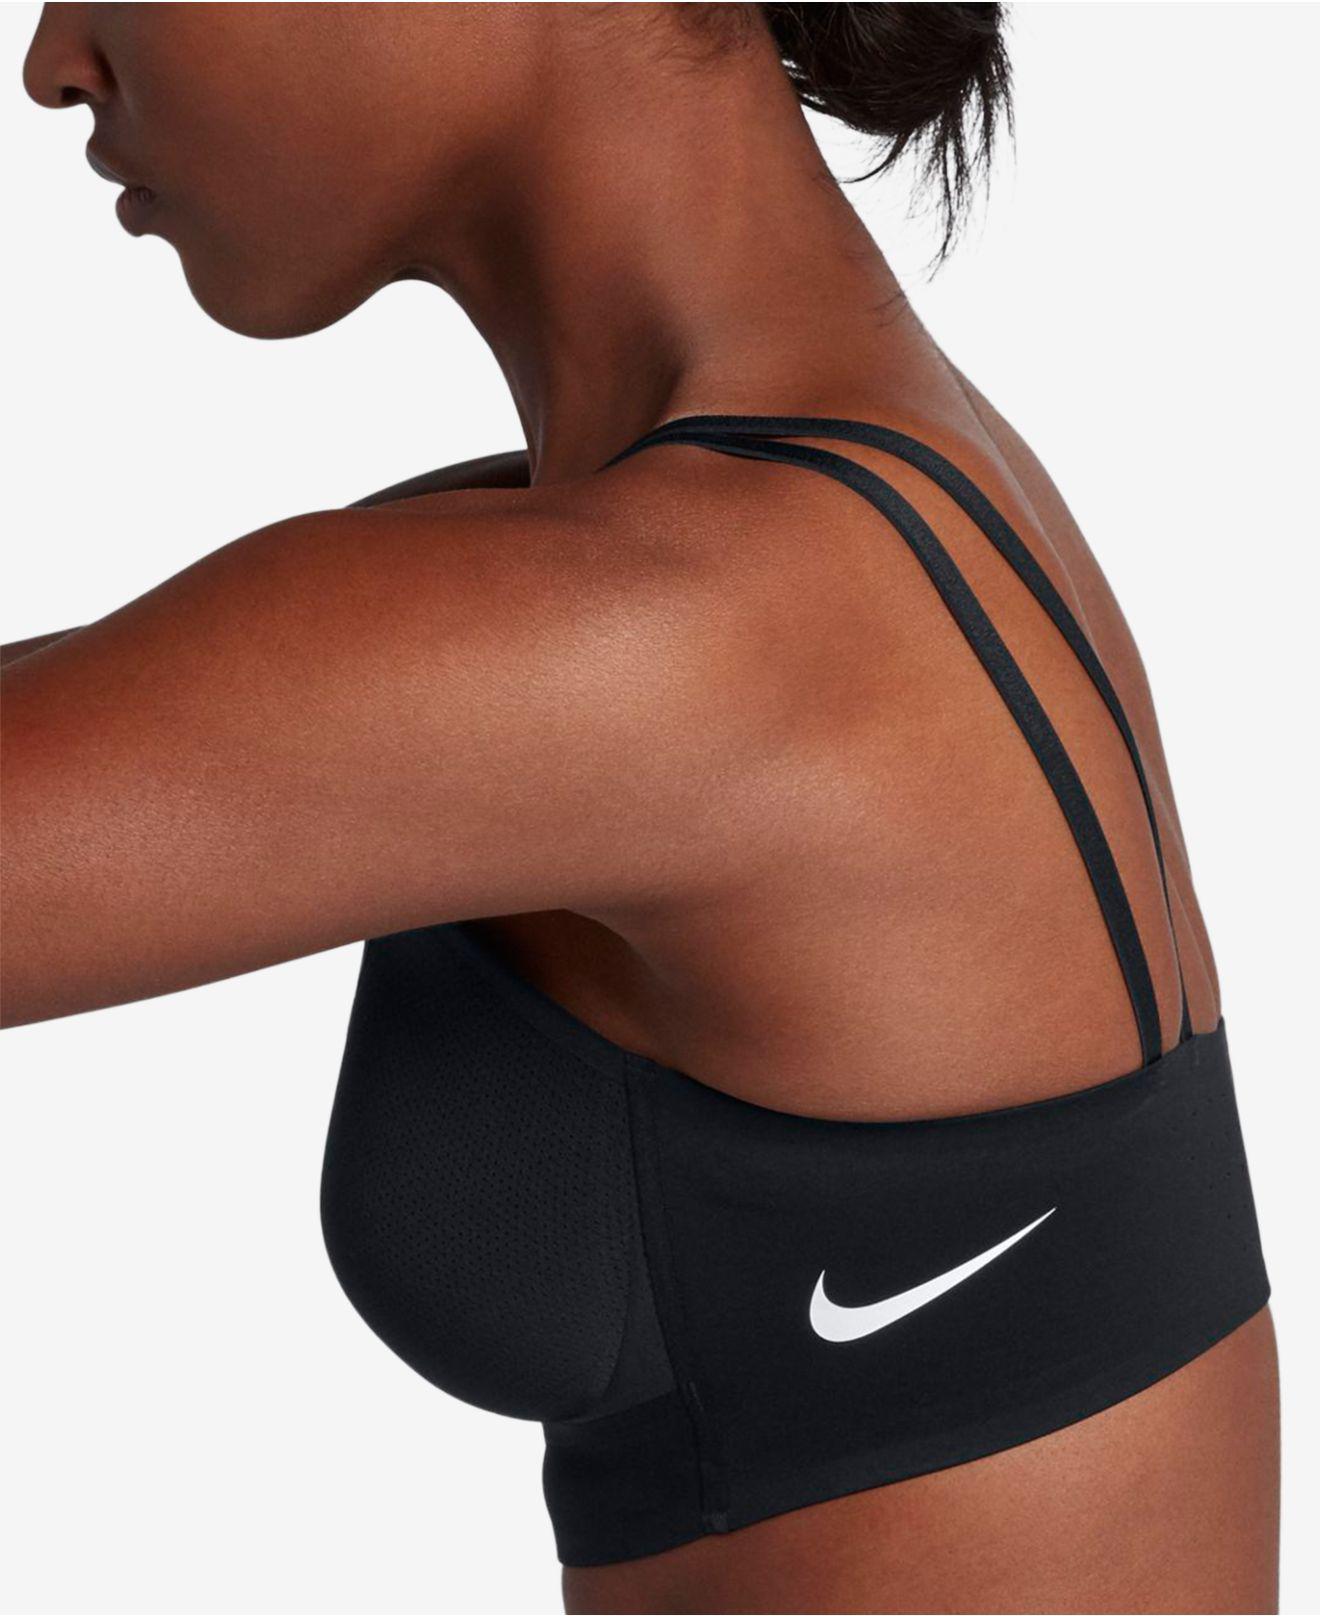 Nike Synthetic Indy Breathe Light Support Sports Bra in Black - Lyst